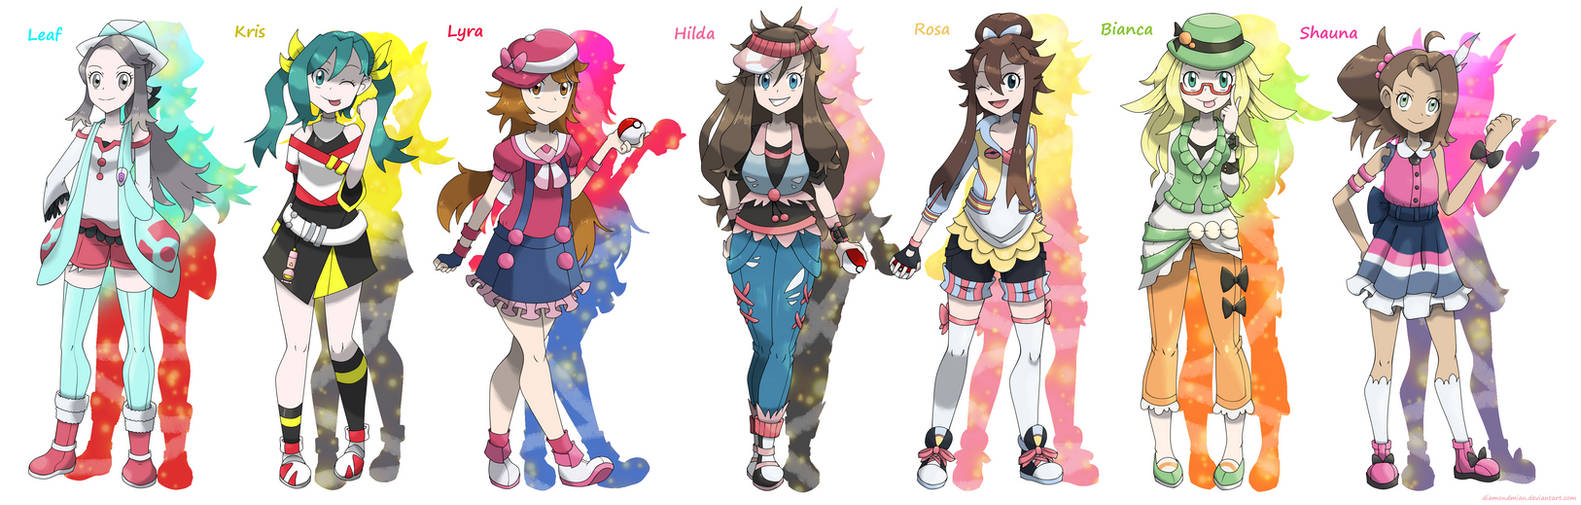 Pokegirl New Outfit Game Heroines and Rivals v.2